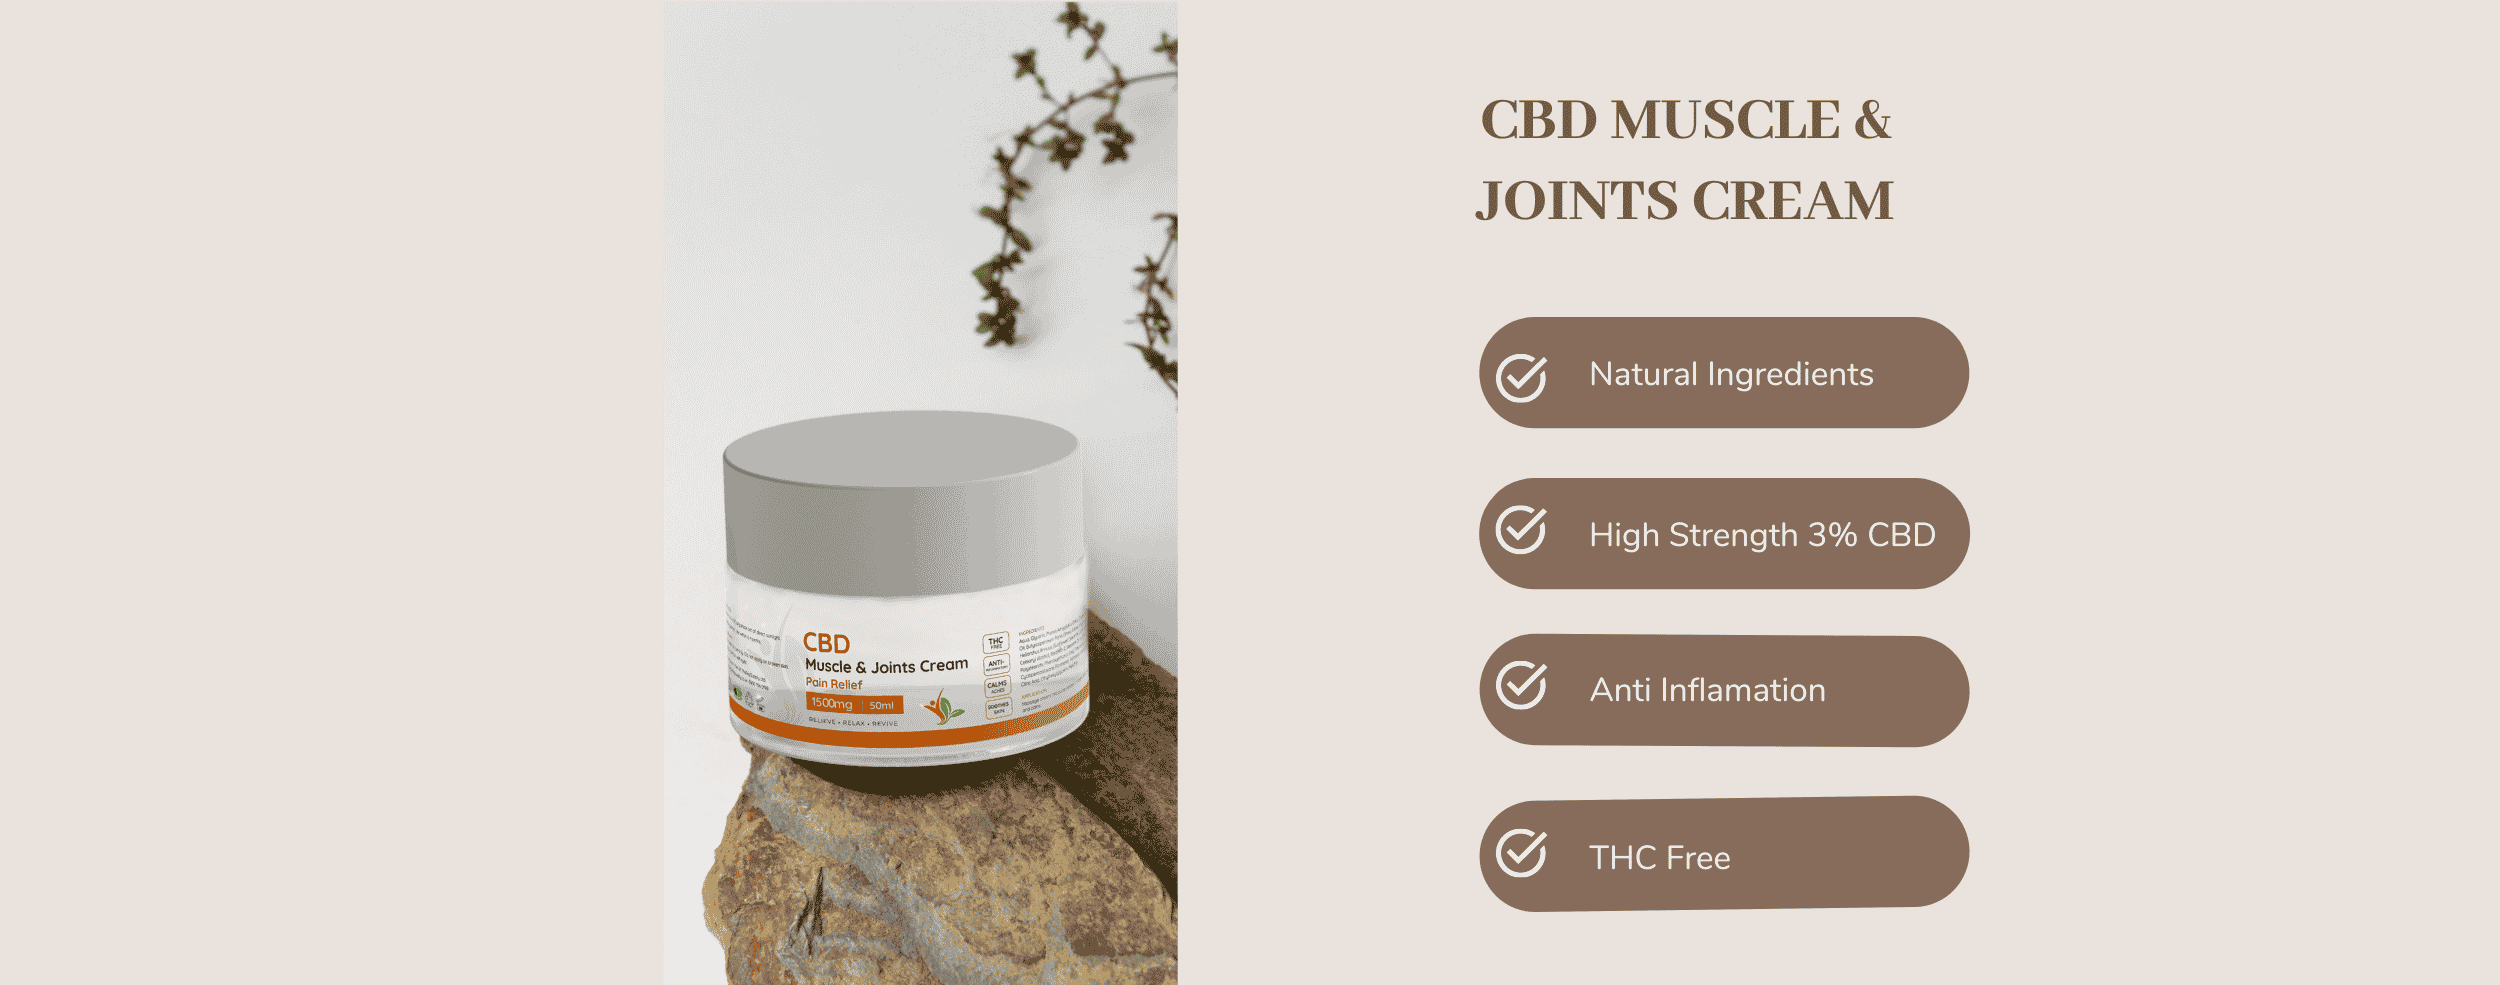 CBD muscle and joints cream